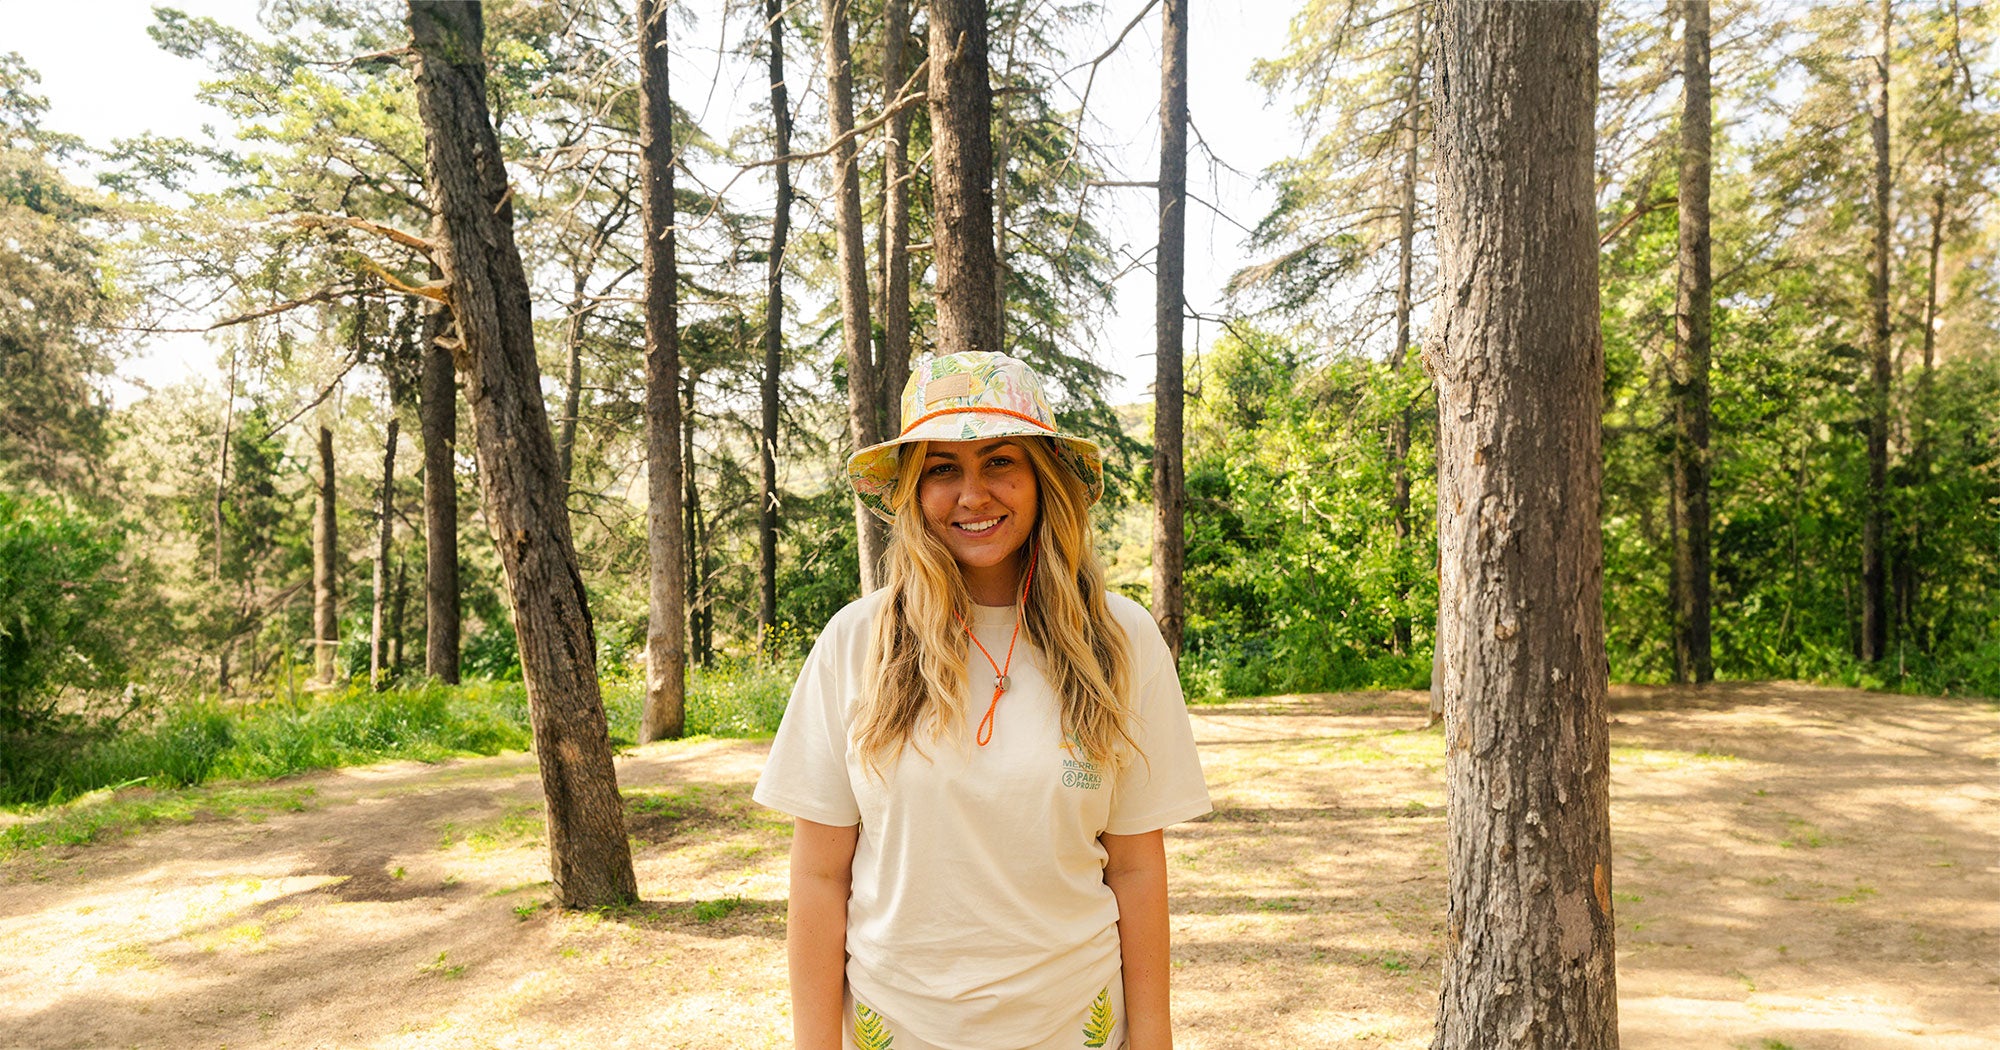 Shop Hats and Beanies Inspired by Our National Parks – Parks Project